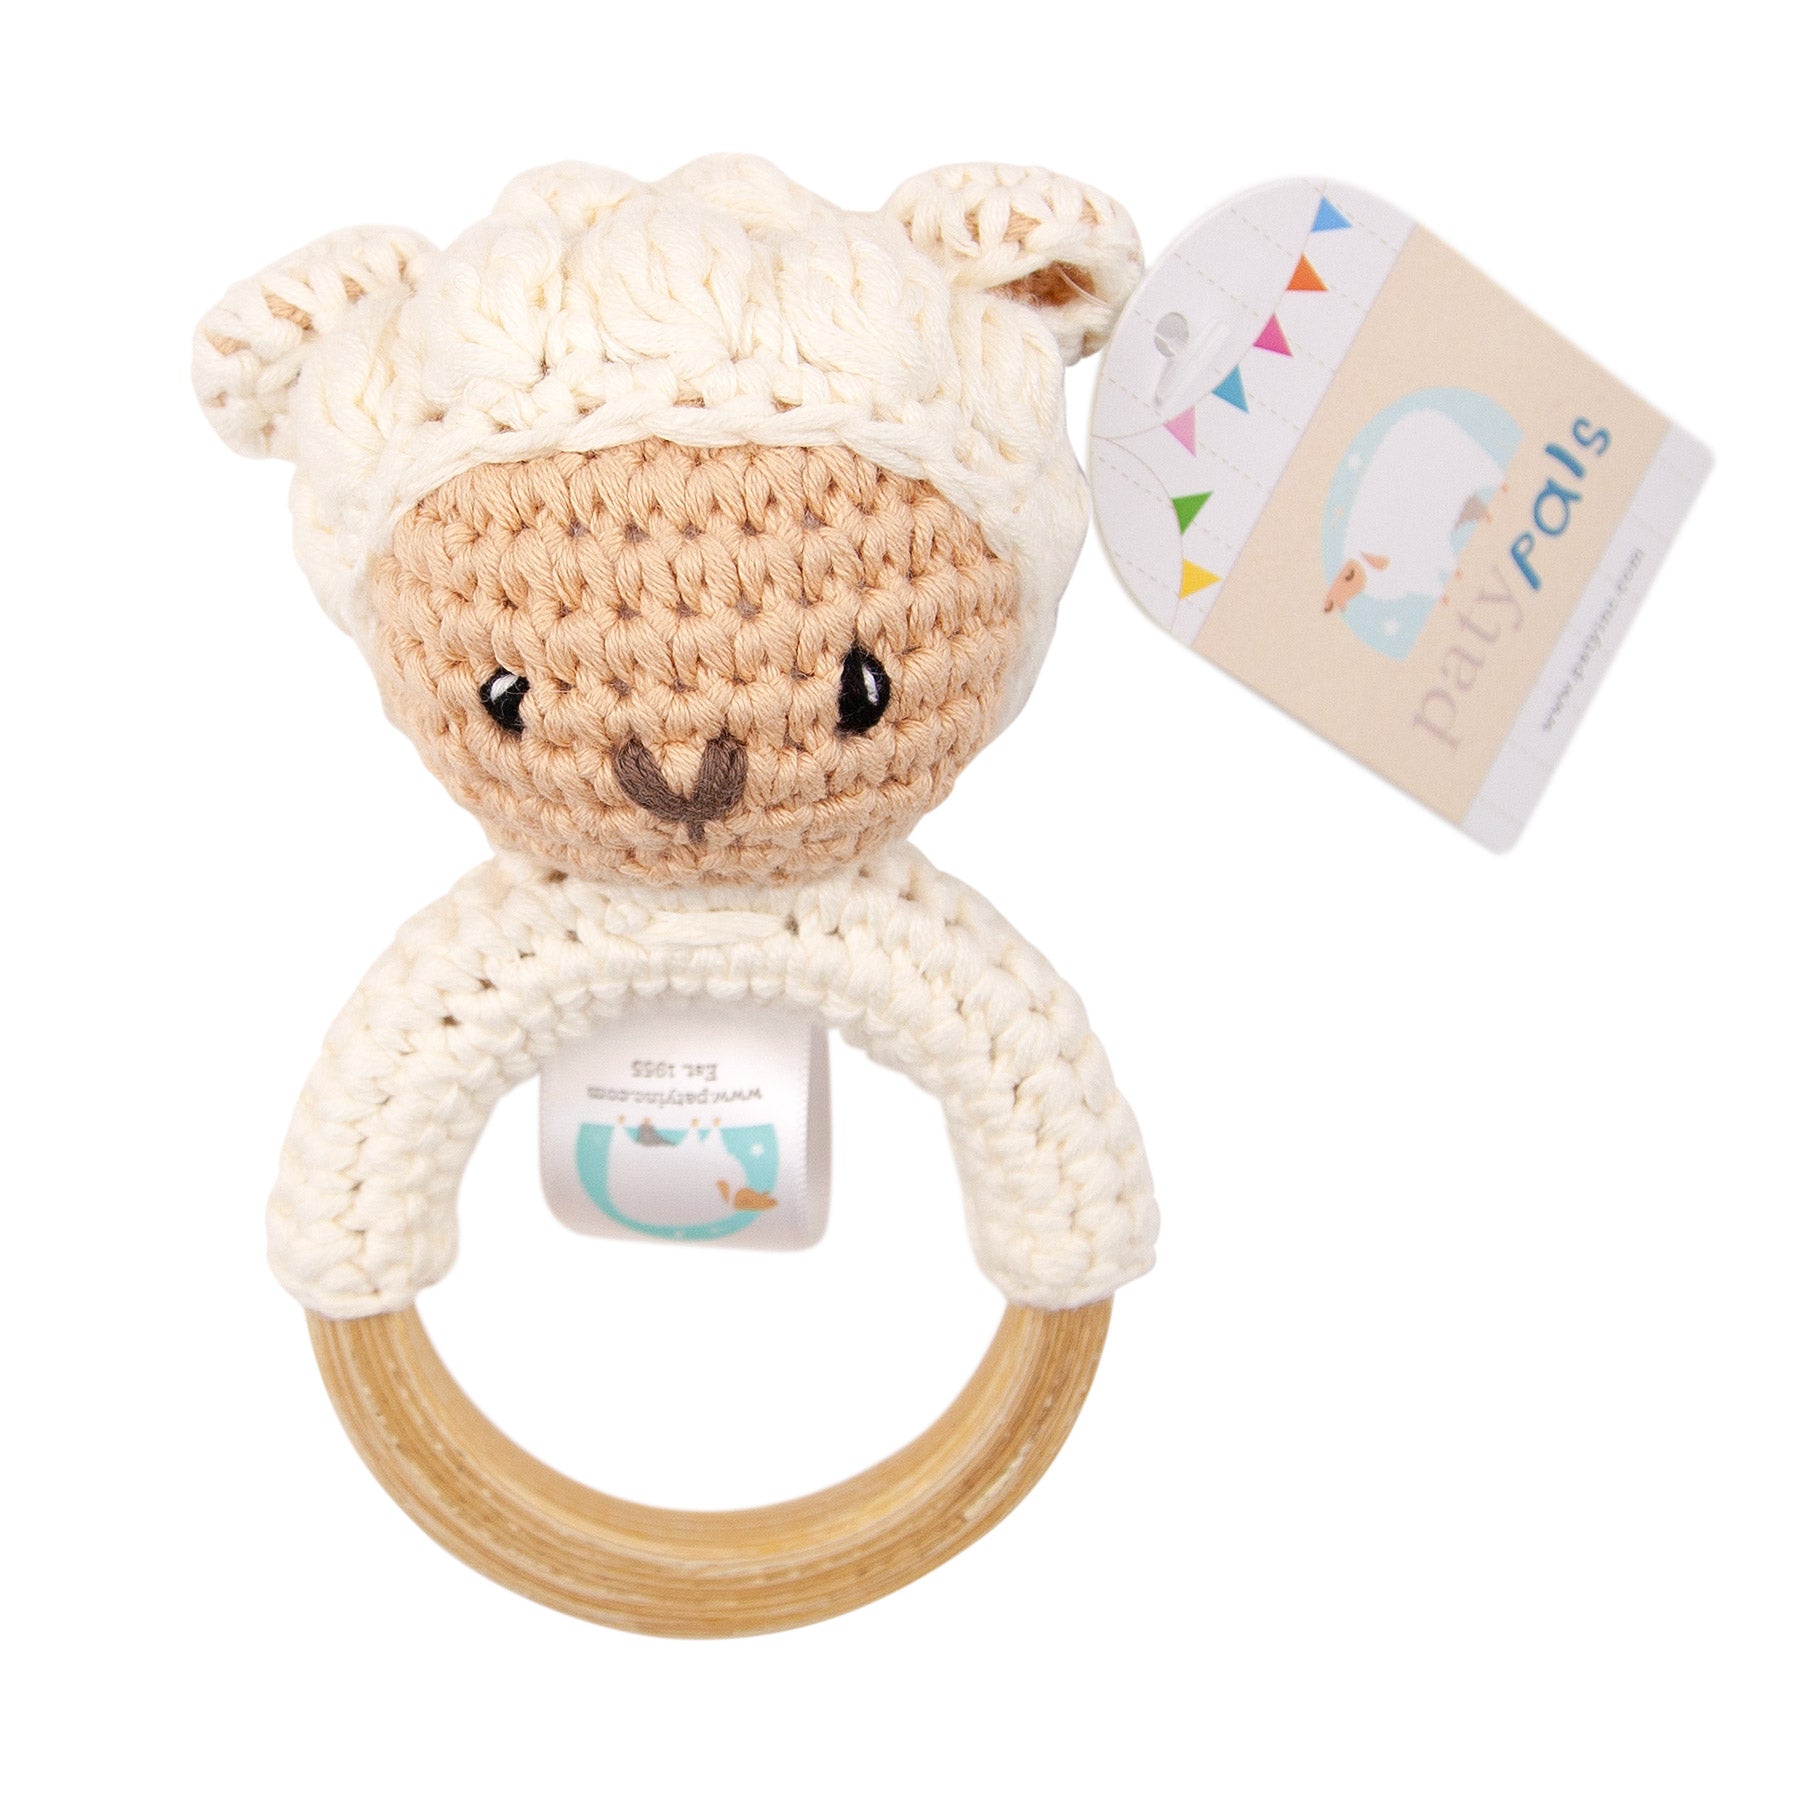 Paty Pals Rattle, Crocheted